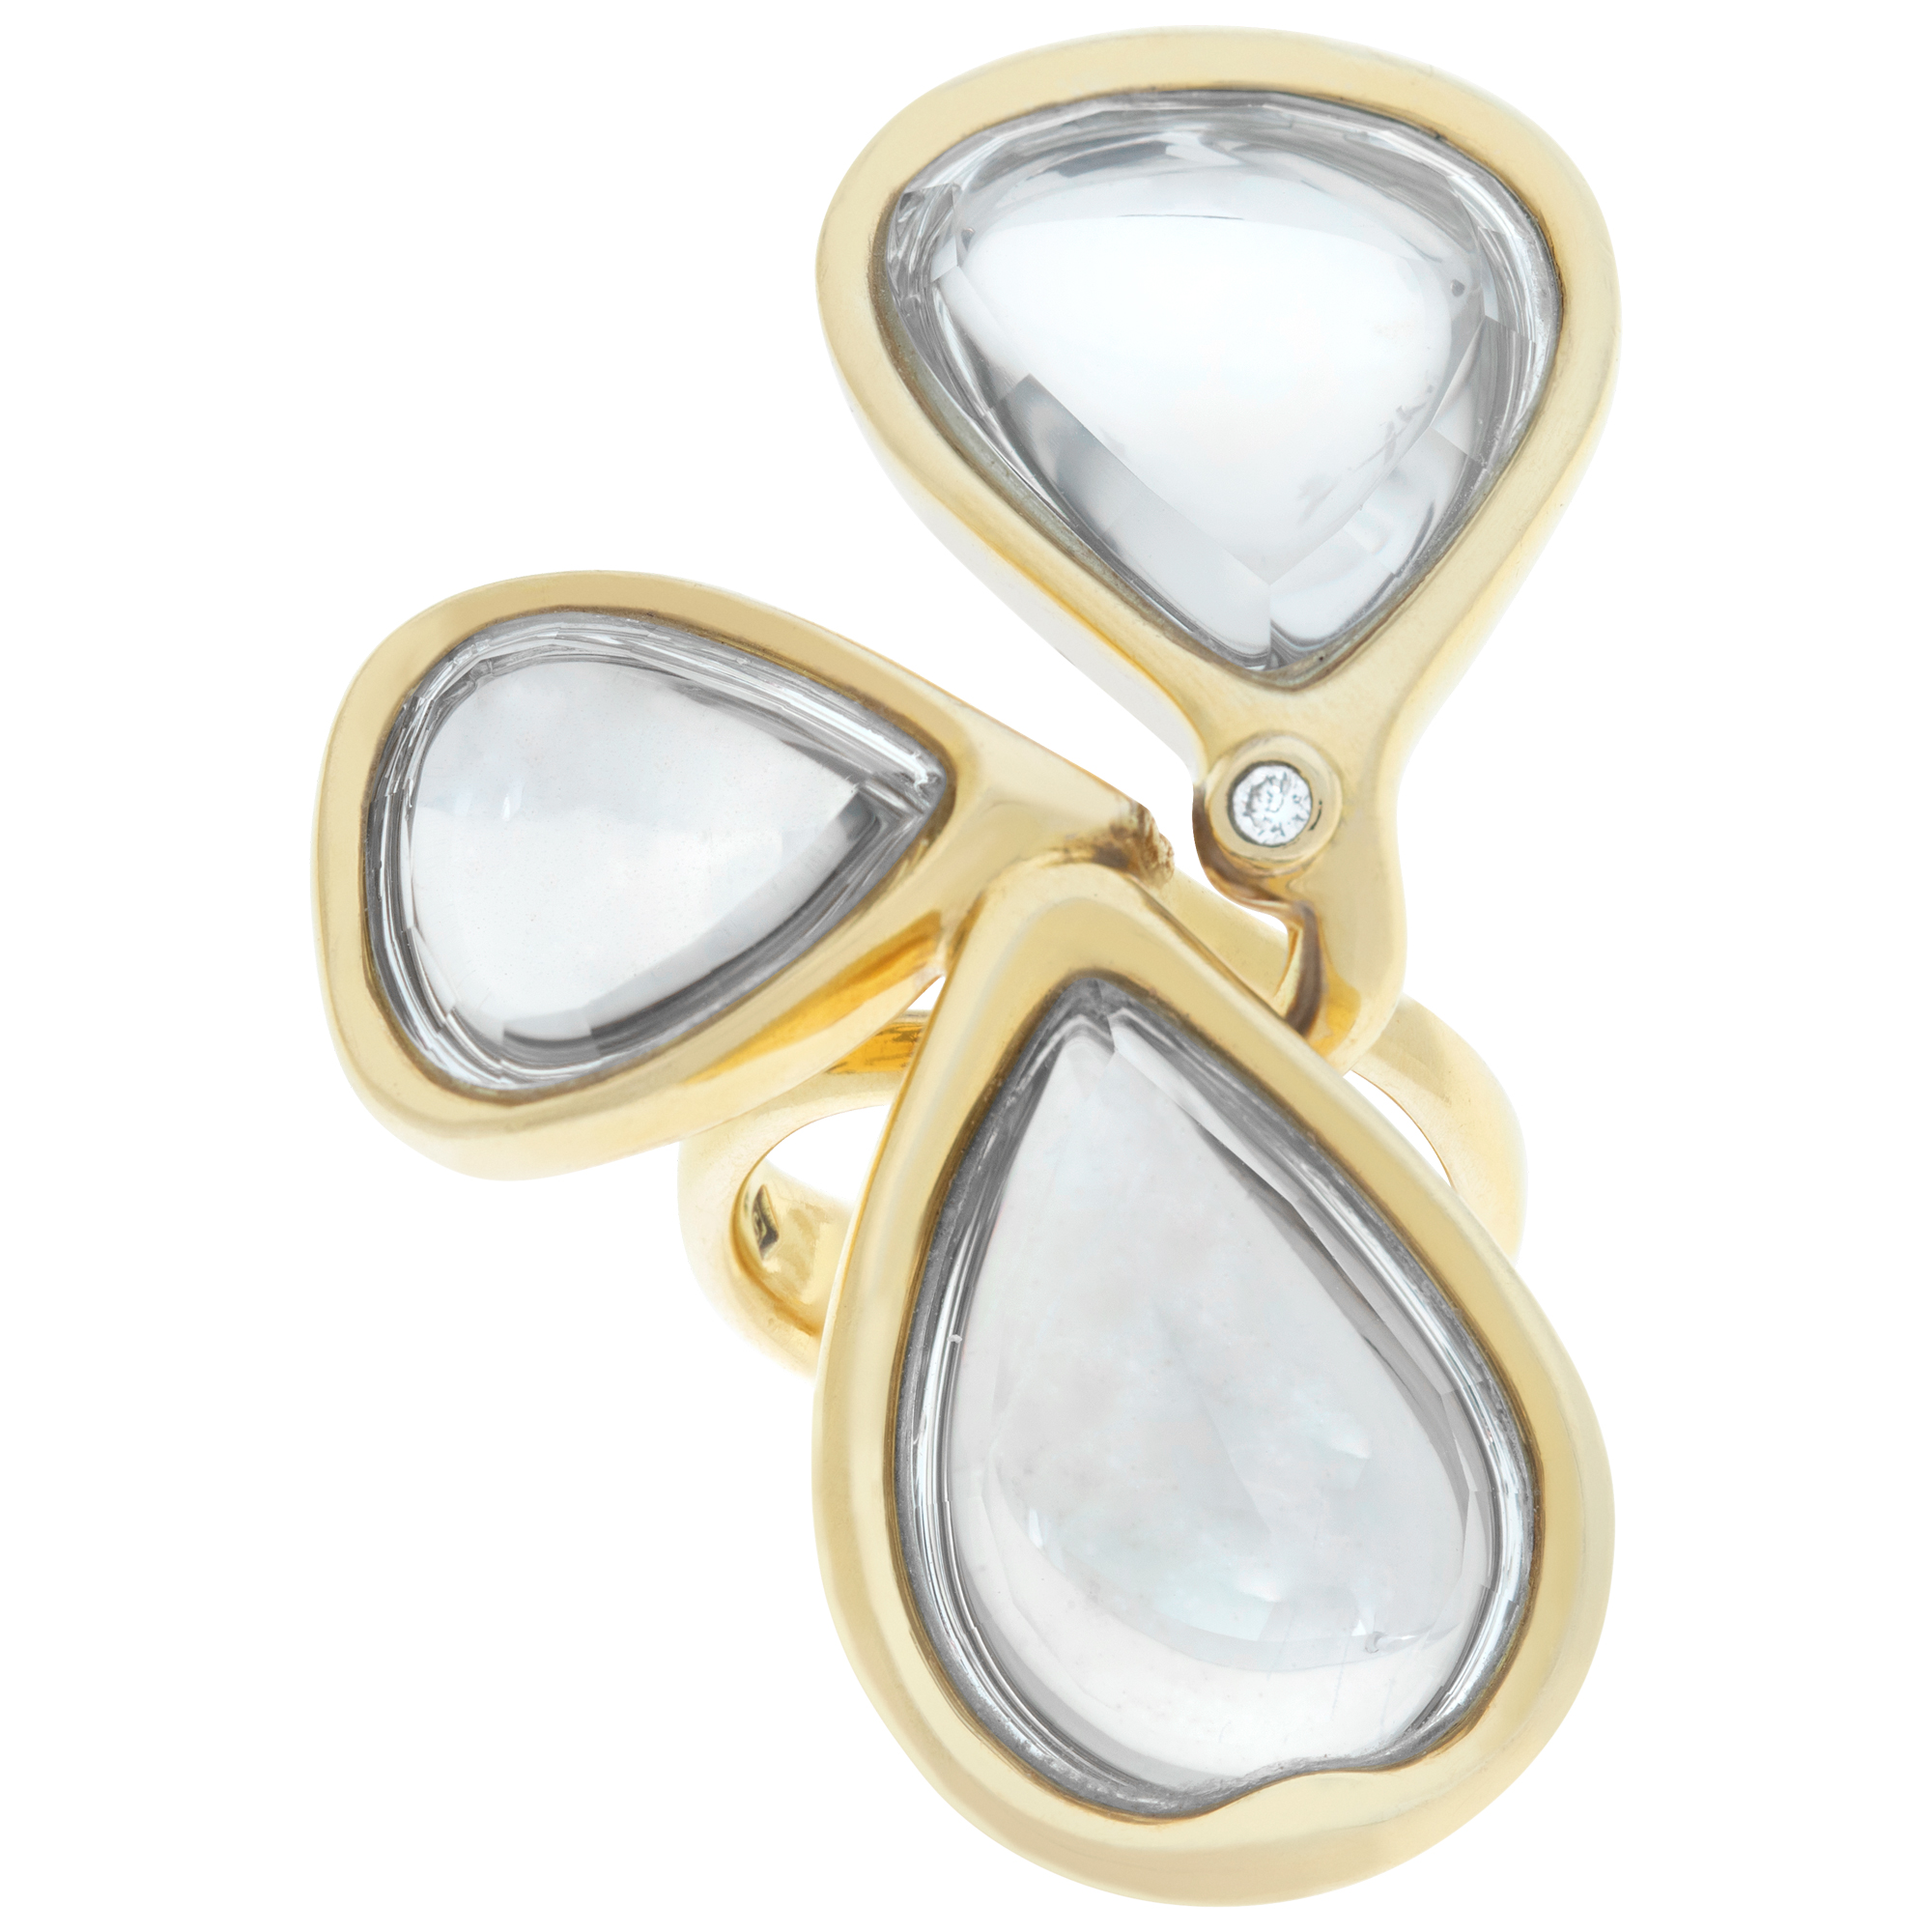 H Stern free form flower ring in 18k with reflective crystal petals and single bezel set diamond in the center.